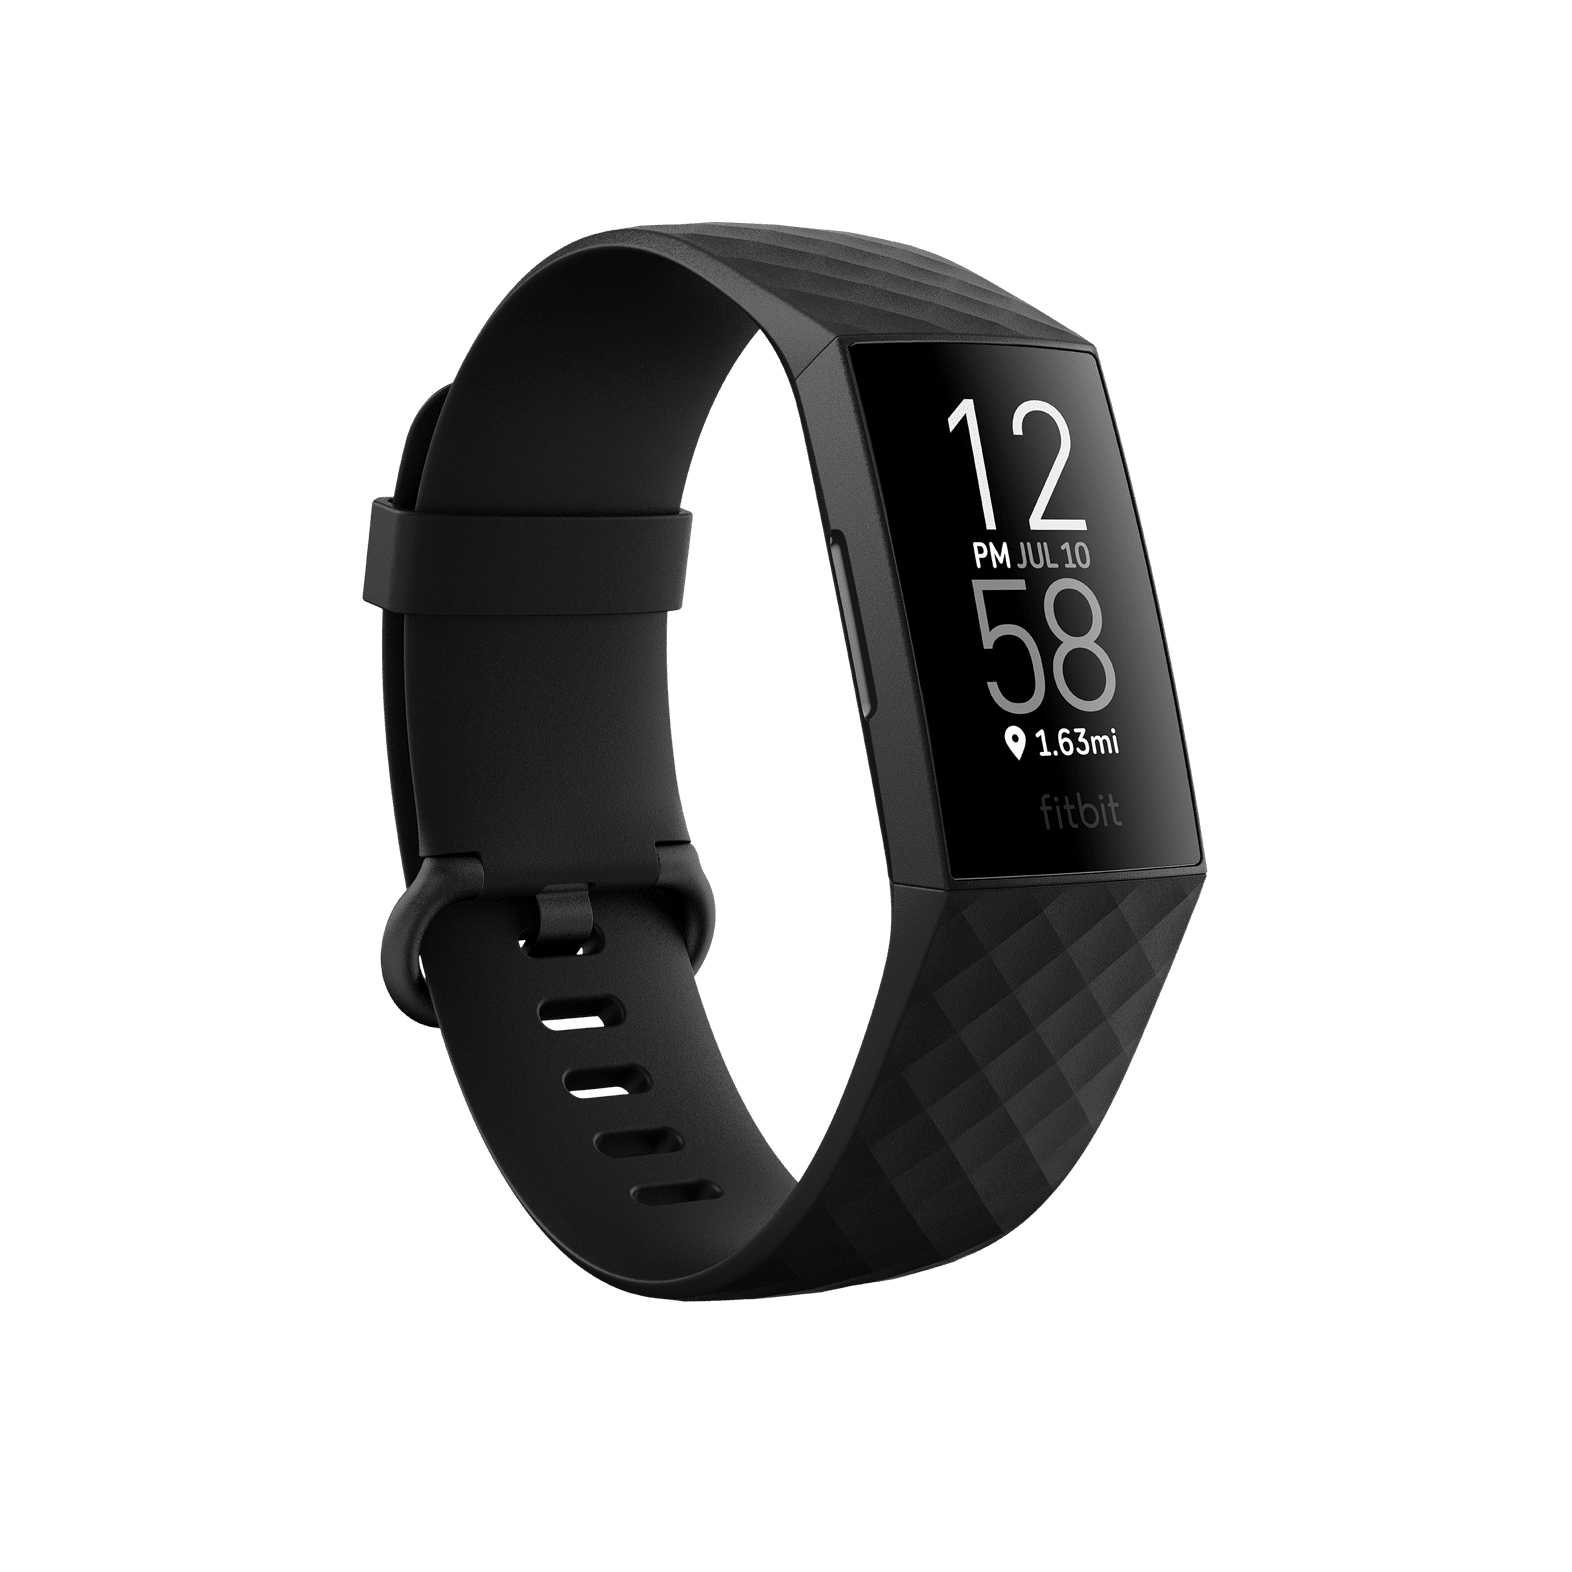 the fitbit store